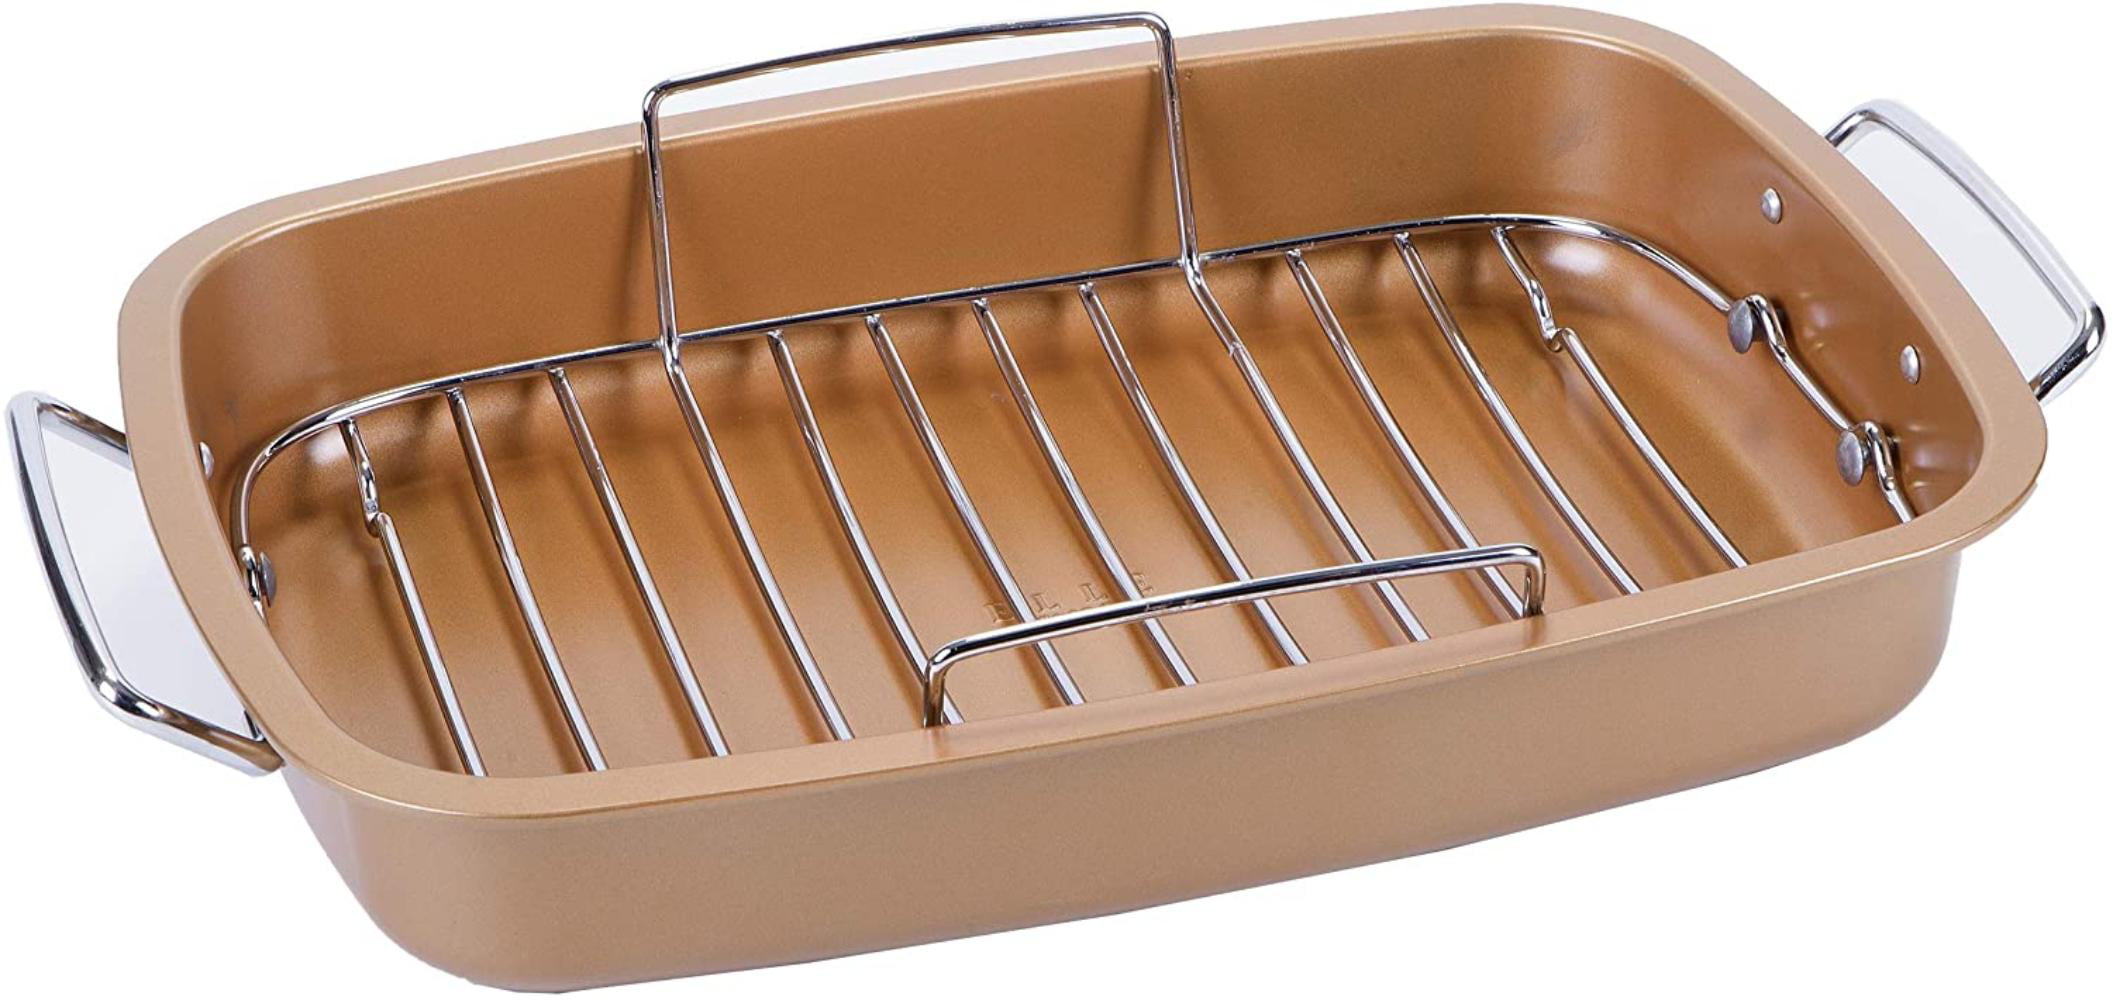 Elle Gourmet Copper Roasting Pan with Rack and Handles for Turkey Chicken 